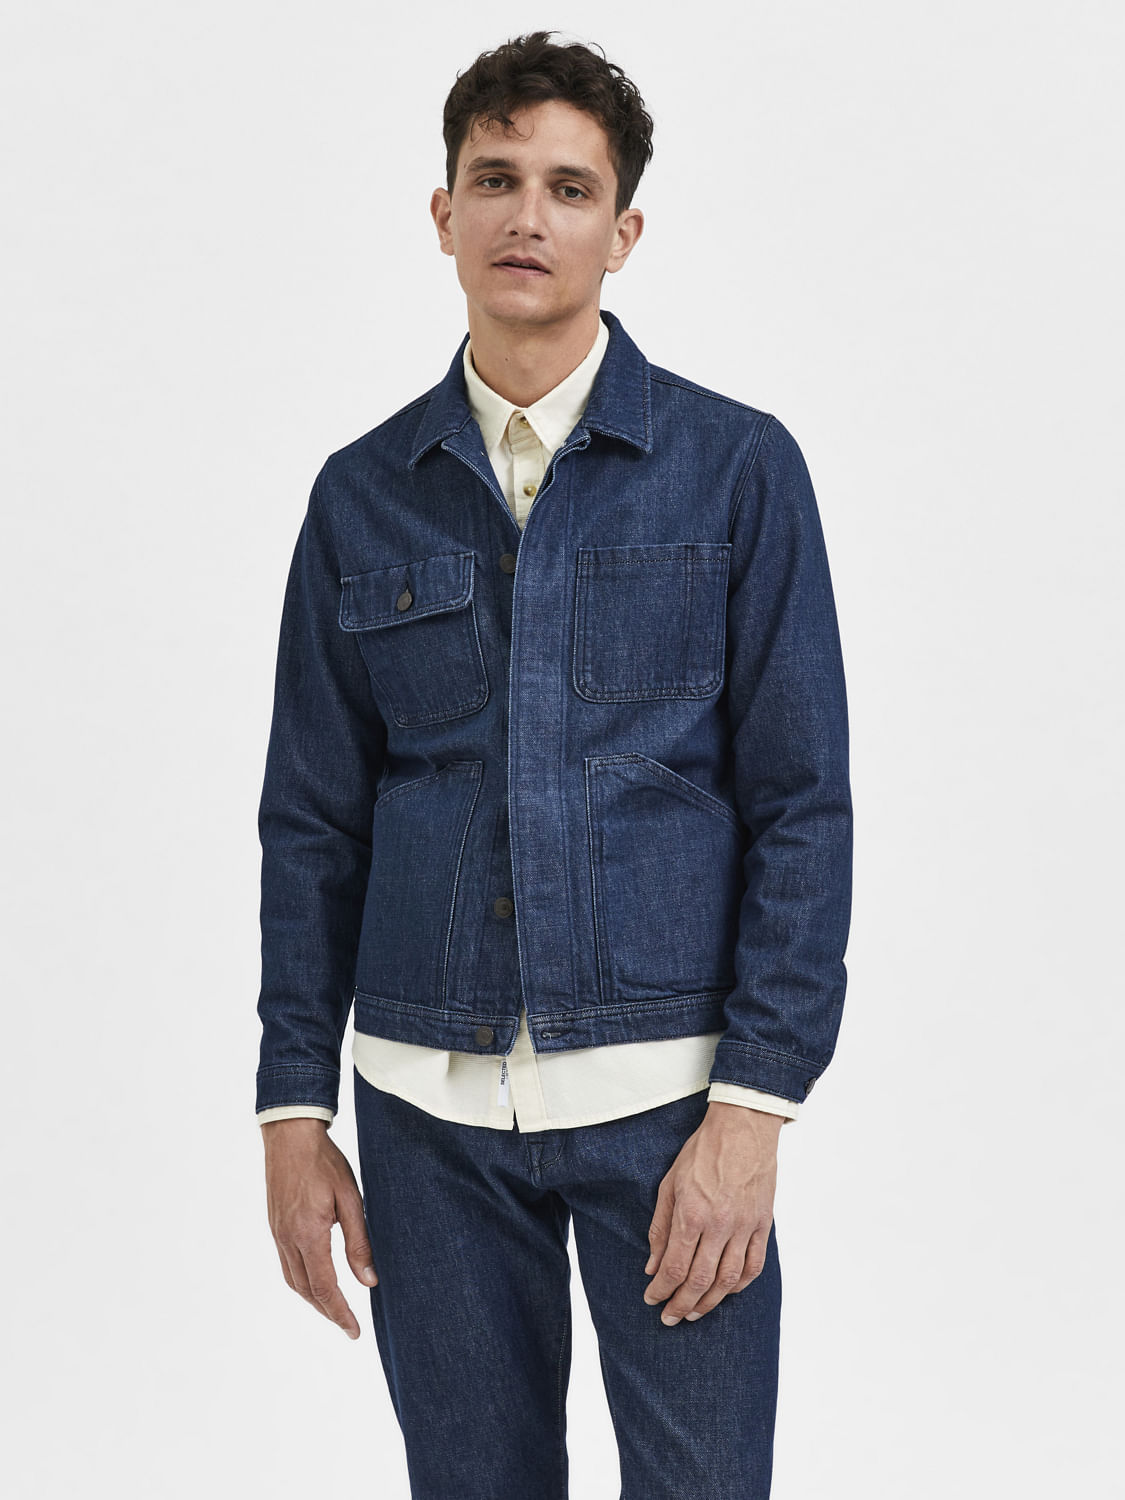 SLAY. Men's Full Sleeves Off-white Solid Button-Down Denim Jacket with  Faux-fur Lining